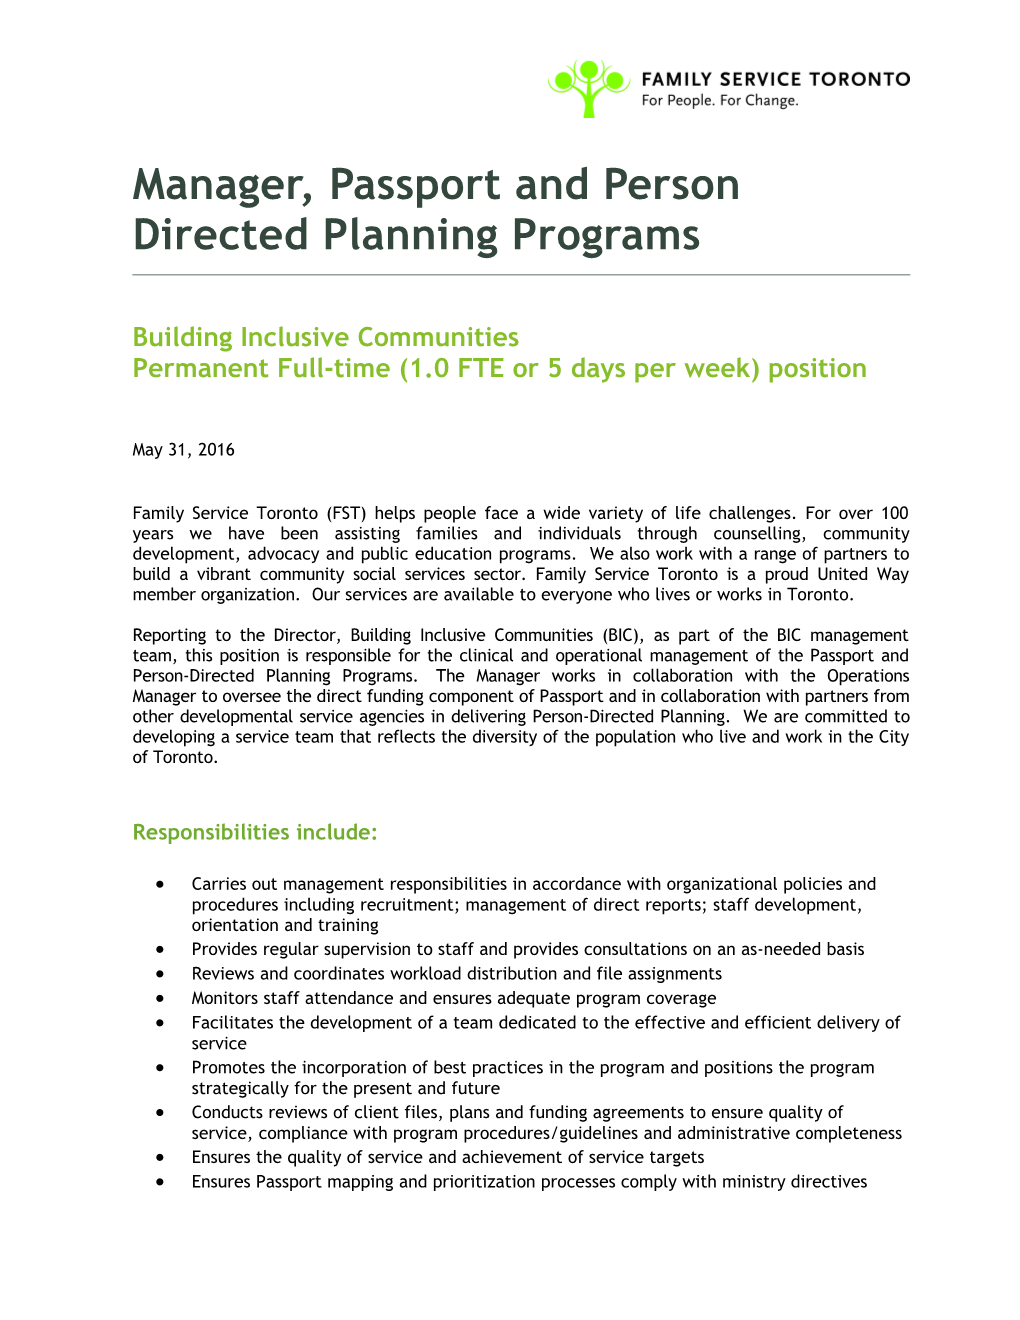 Manager, Passport and Person Directed Planning Programs